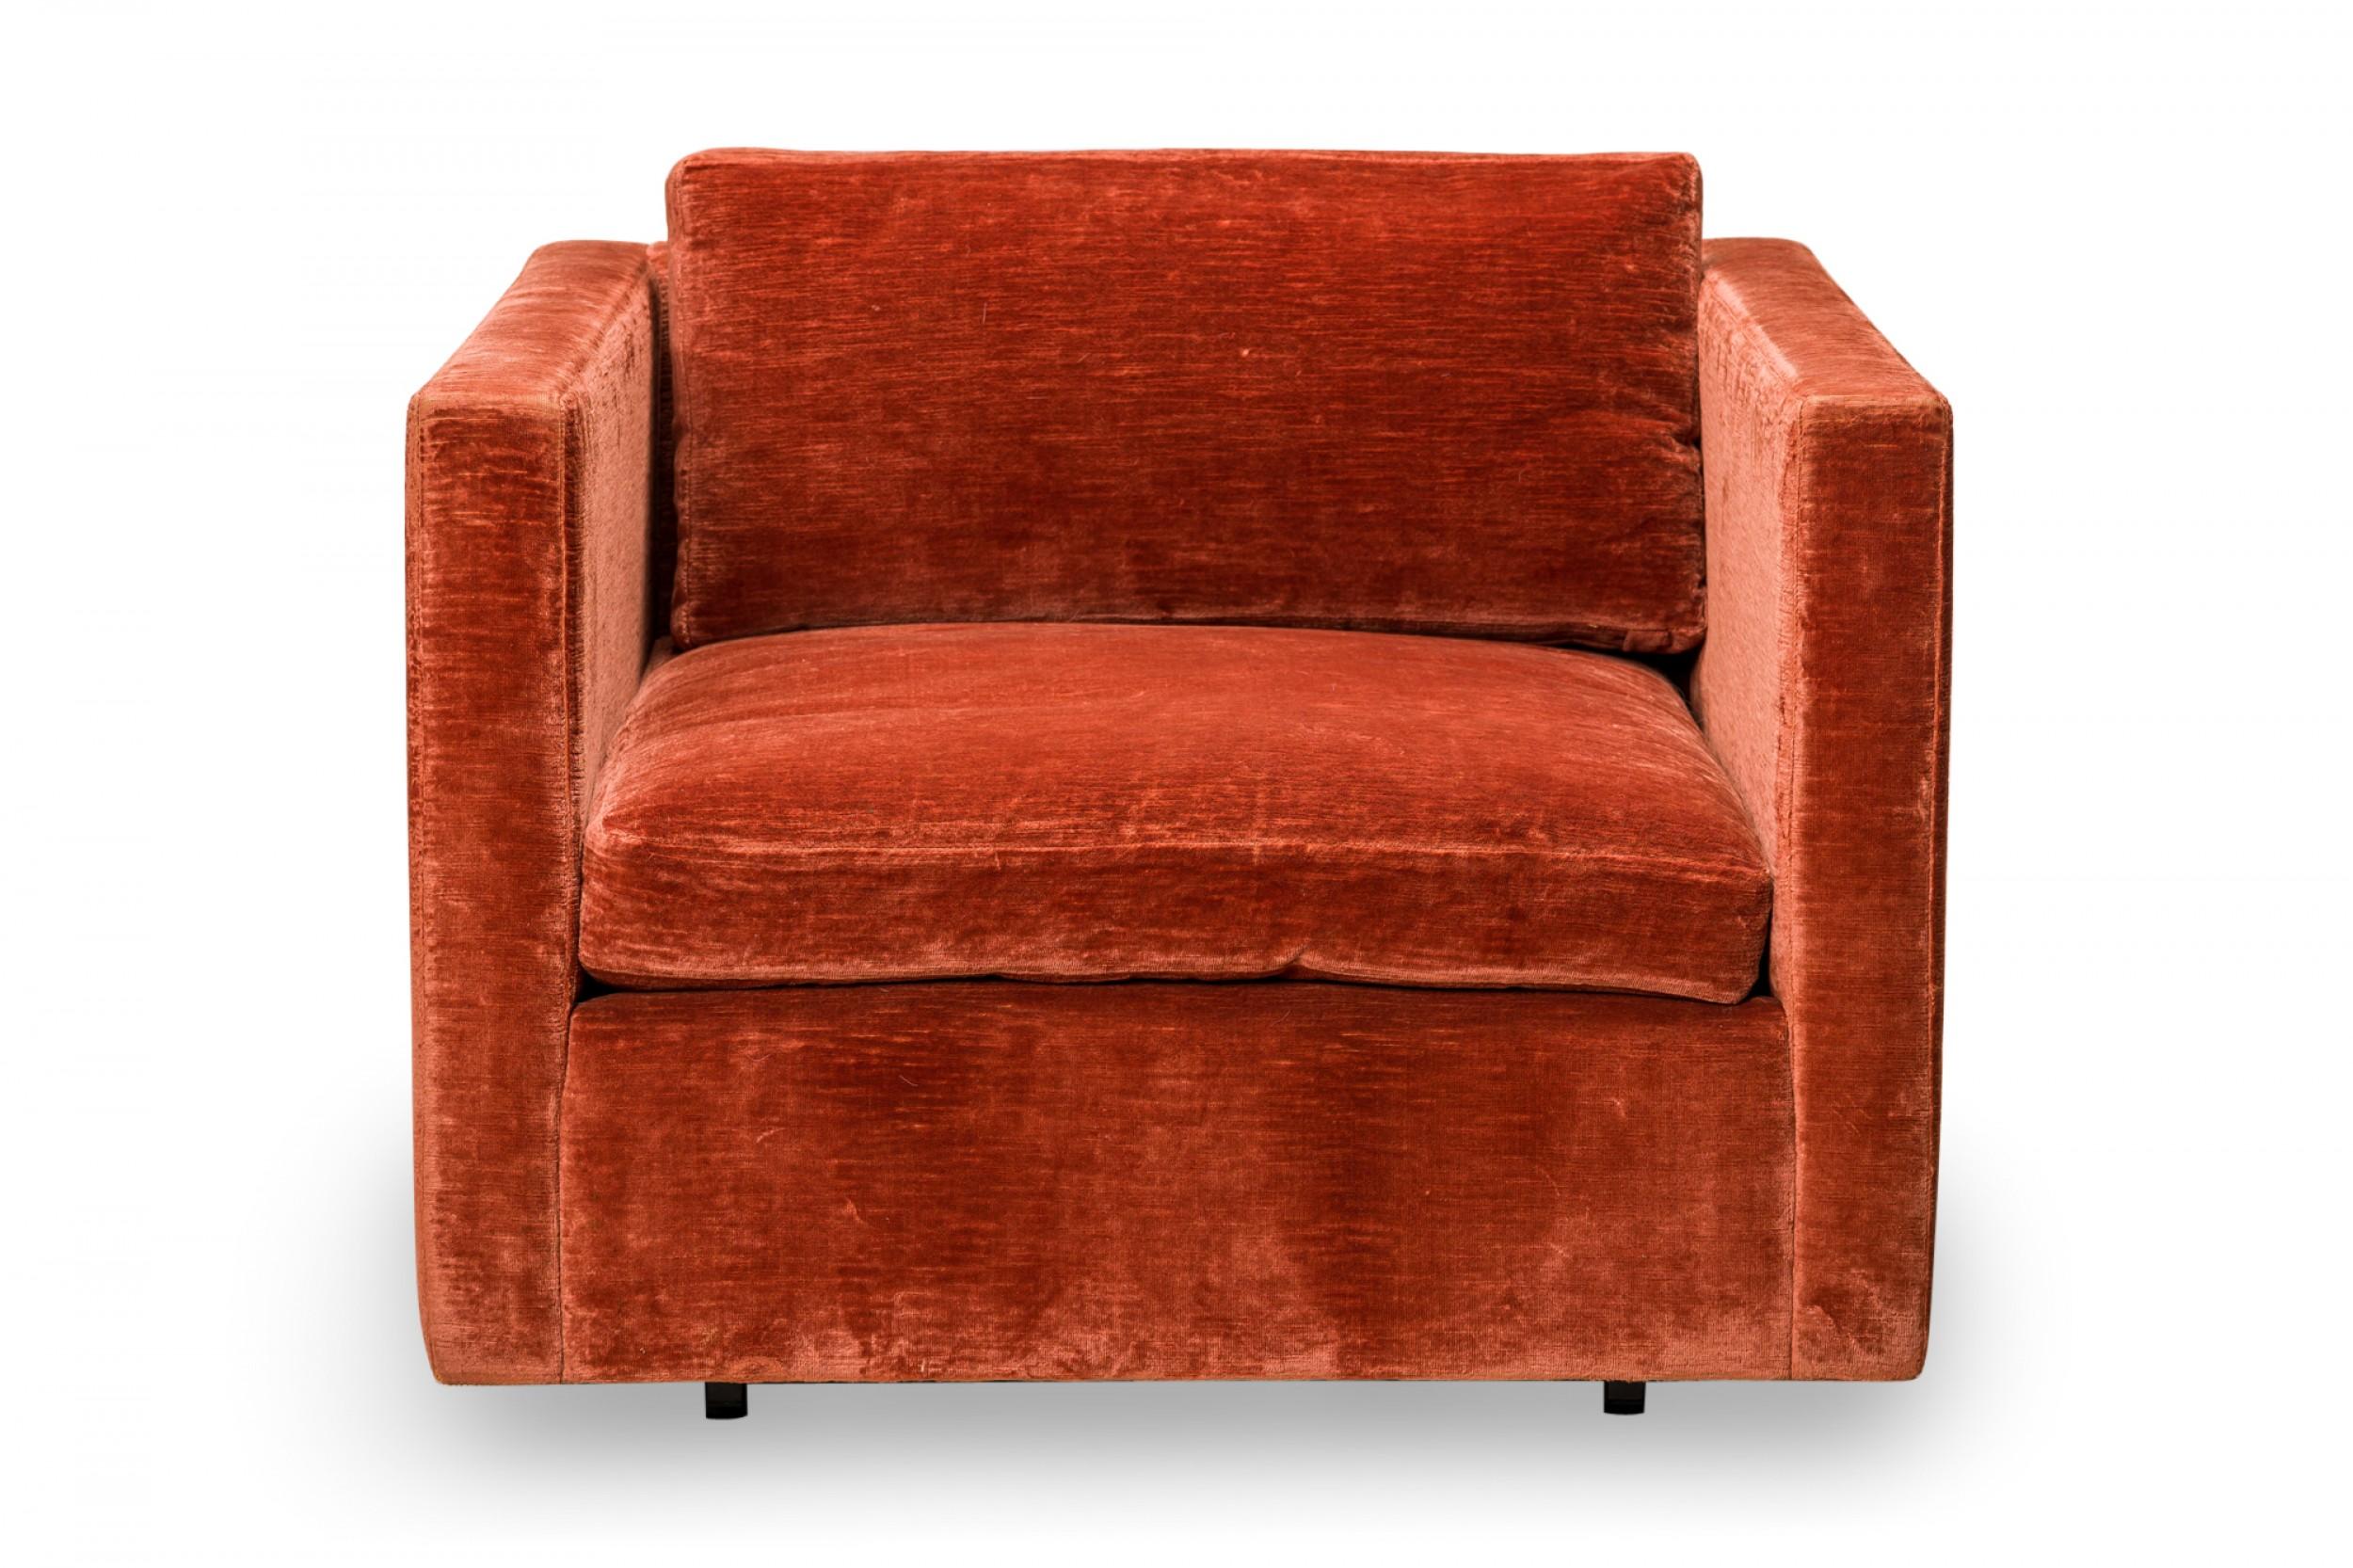 American mid-century 'Tuxedo' form lounge / armchair with crushed orange velvet upholstery, a square profile, and a removable seat and back cushion. (CHARLES PFISTER FOR KNOLL)
 